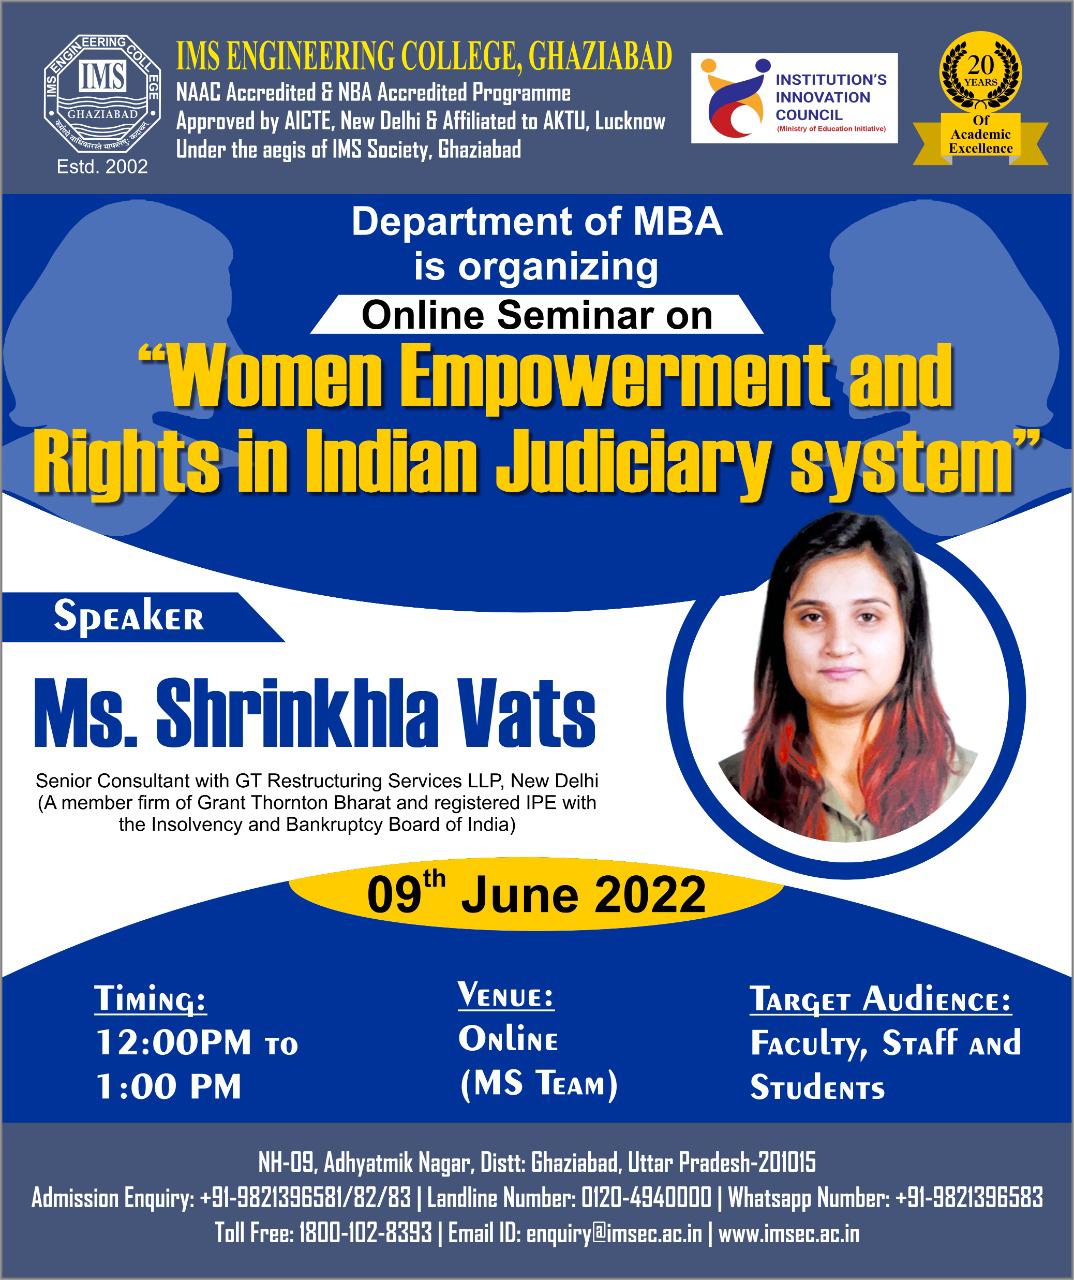 Department of Management organise an Online Seminar on Women Empowerment and Rights in Indian Judiciary system